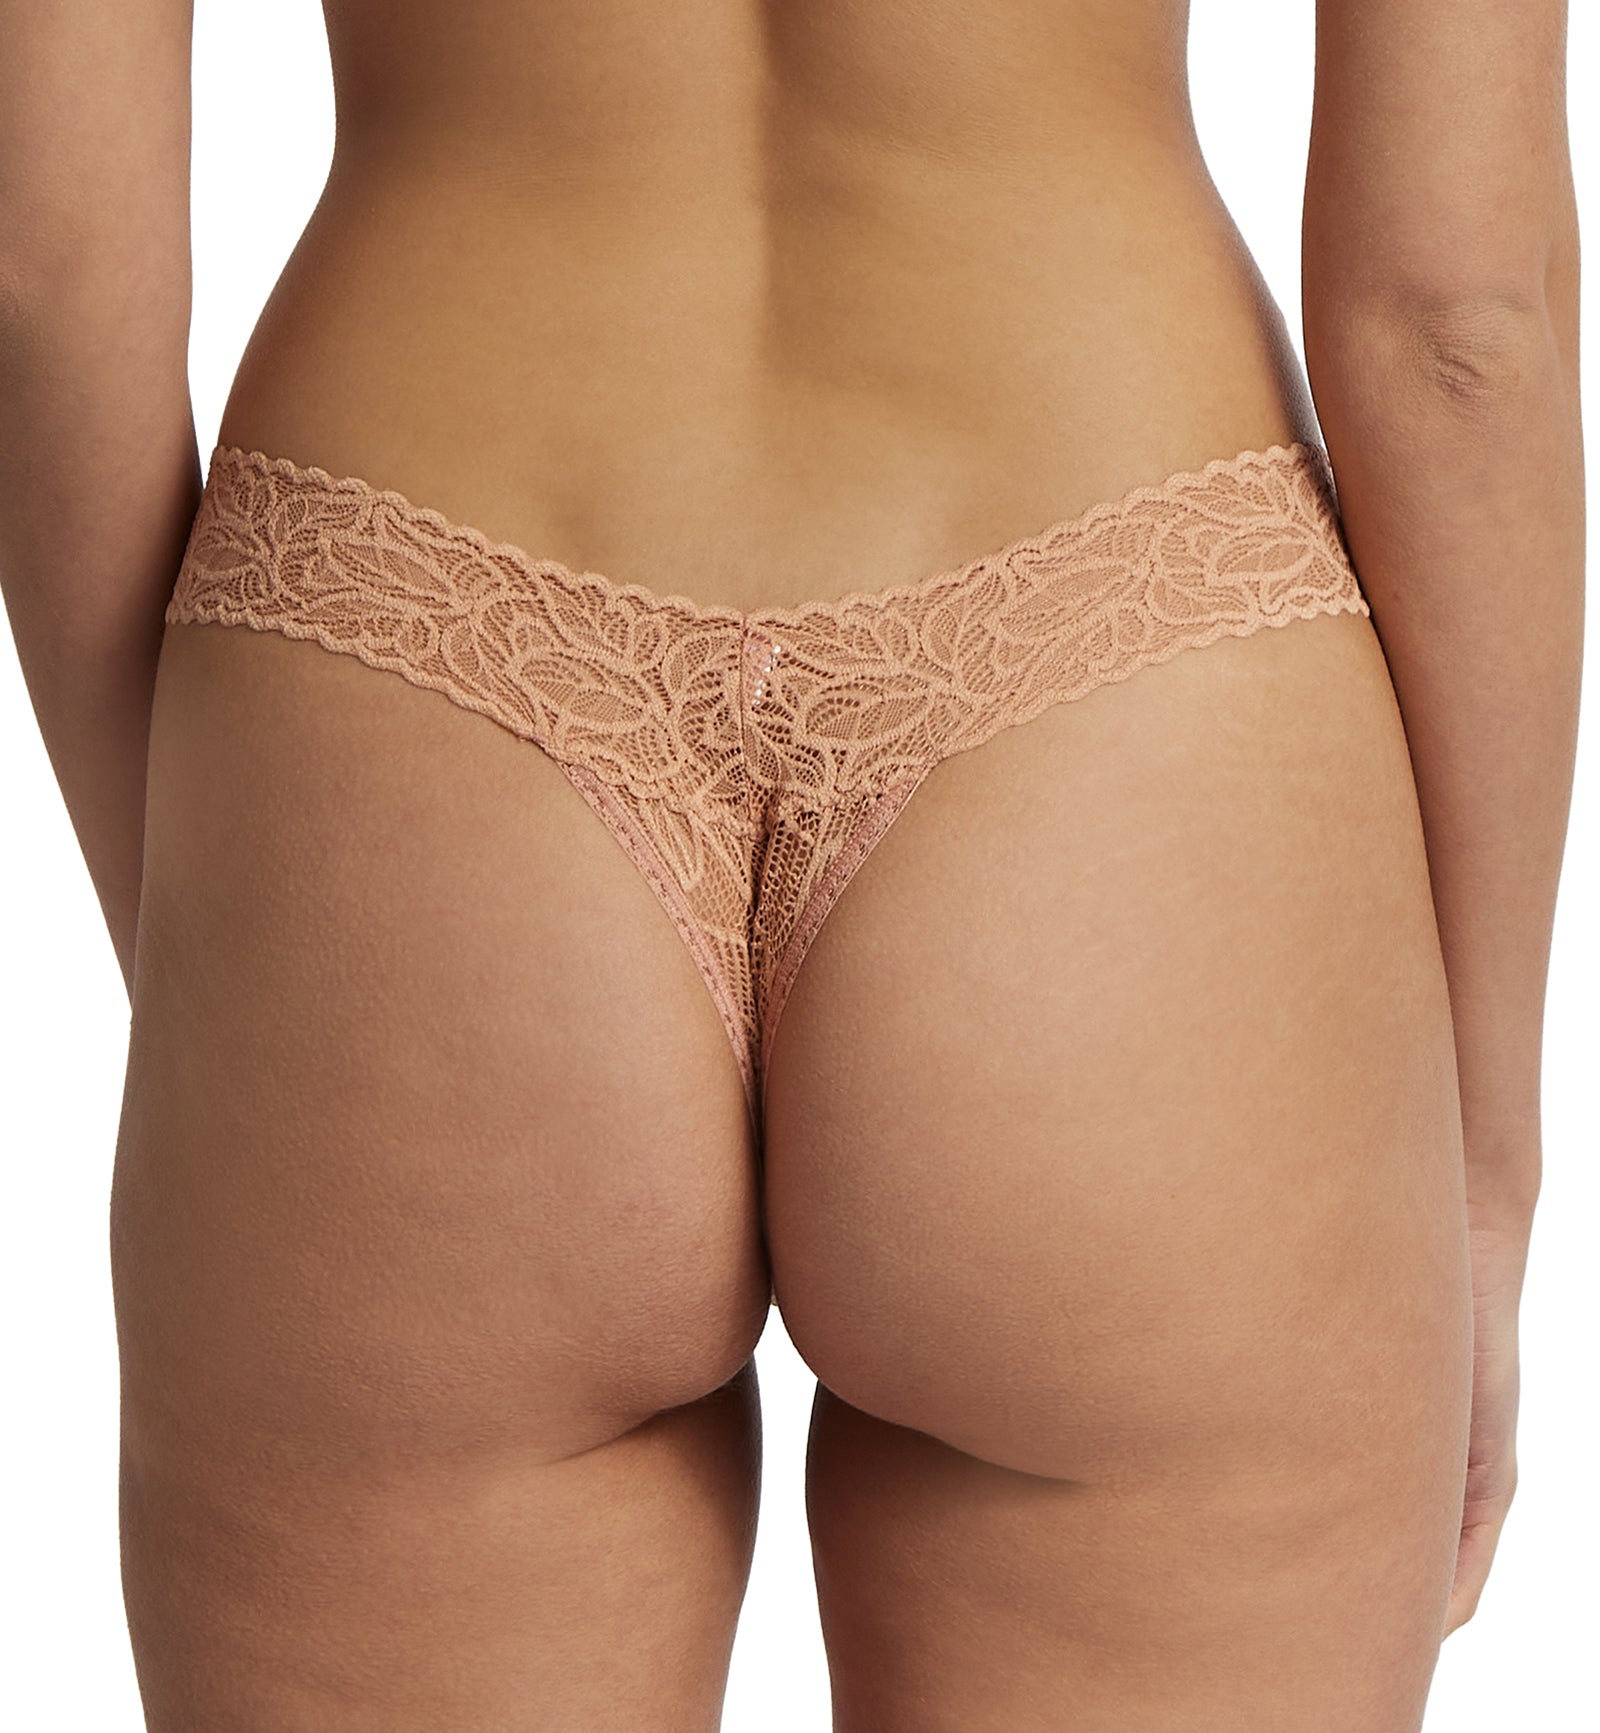 Hanky Panky Re-Leaf Low Rise Thong (5W1584P),Stardust - Stardust,One Size